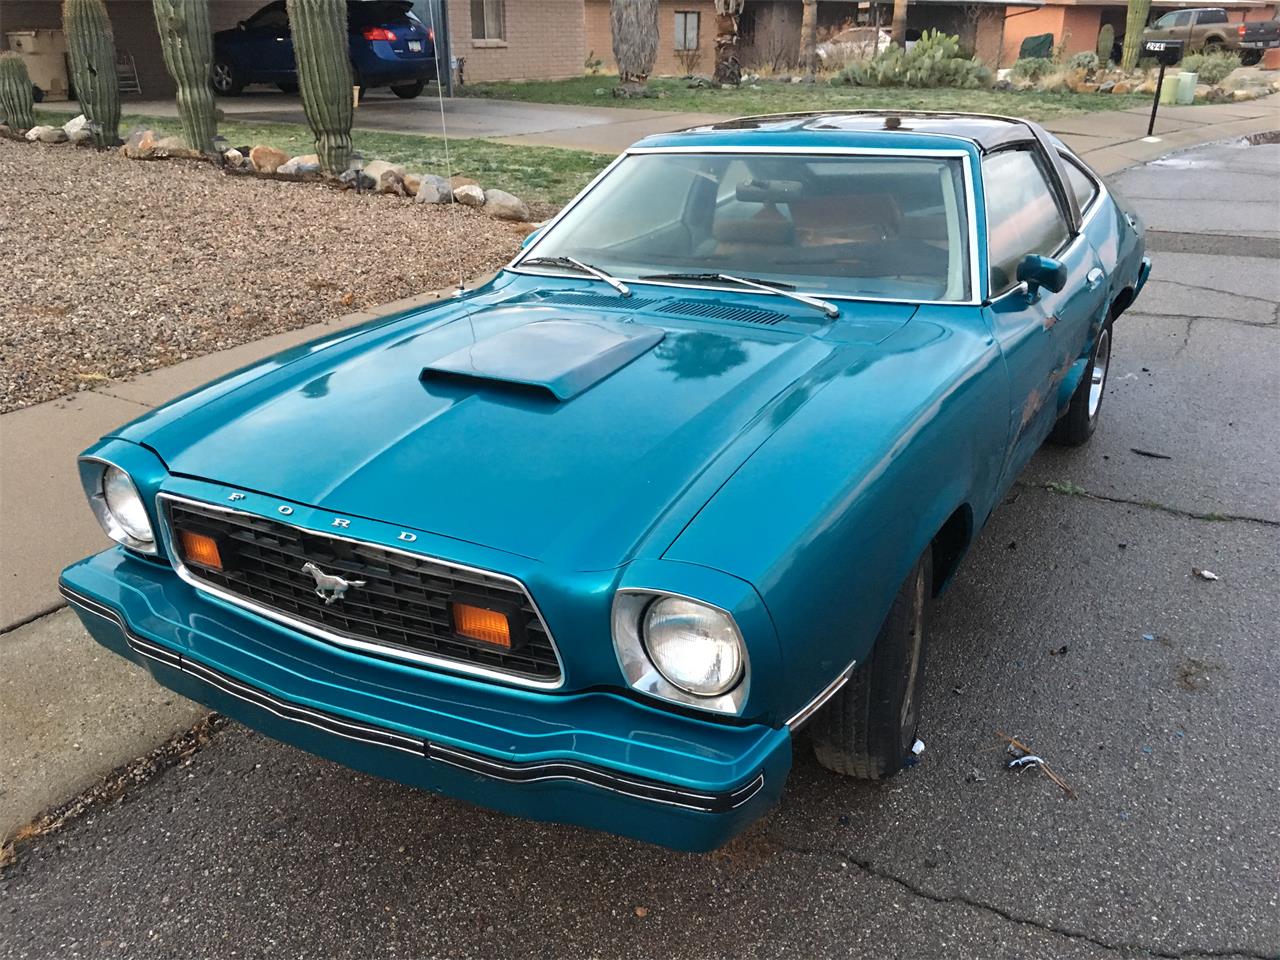 1978 Mustang Car For Sale